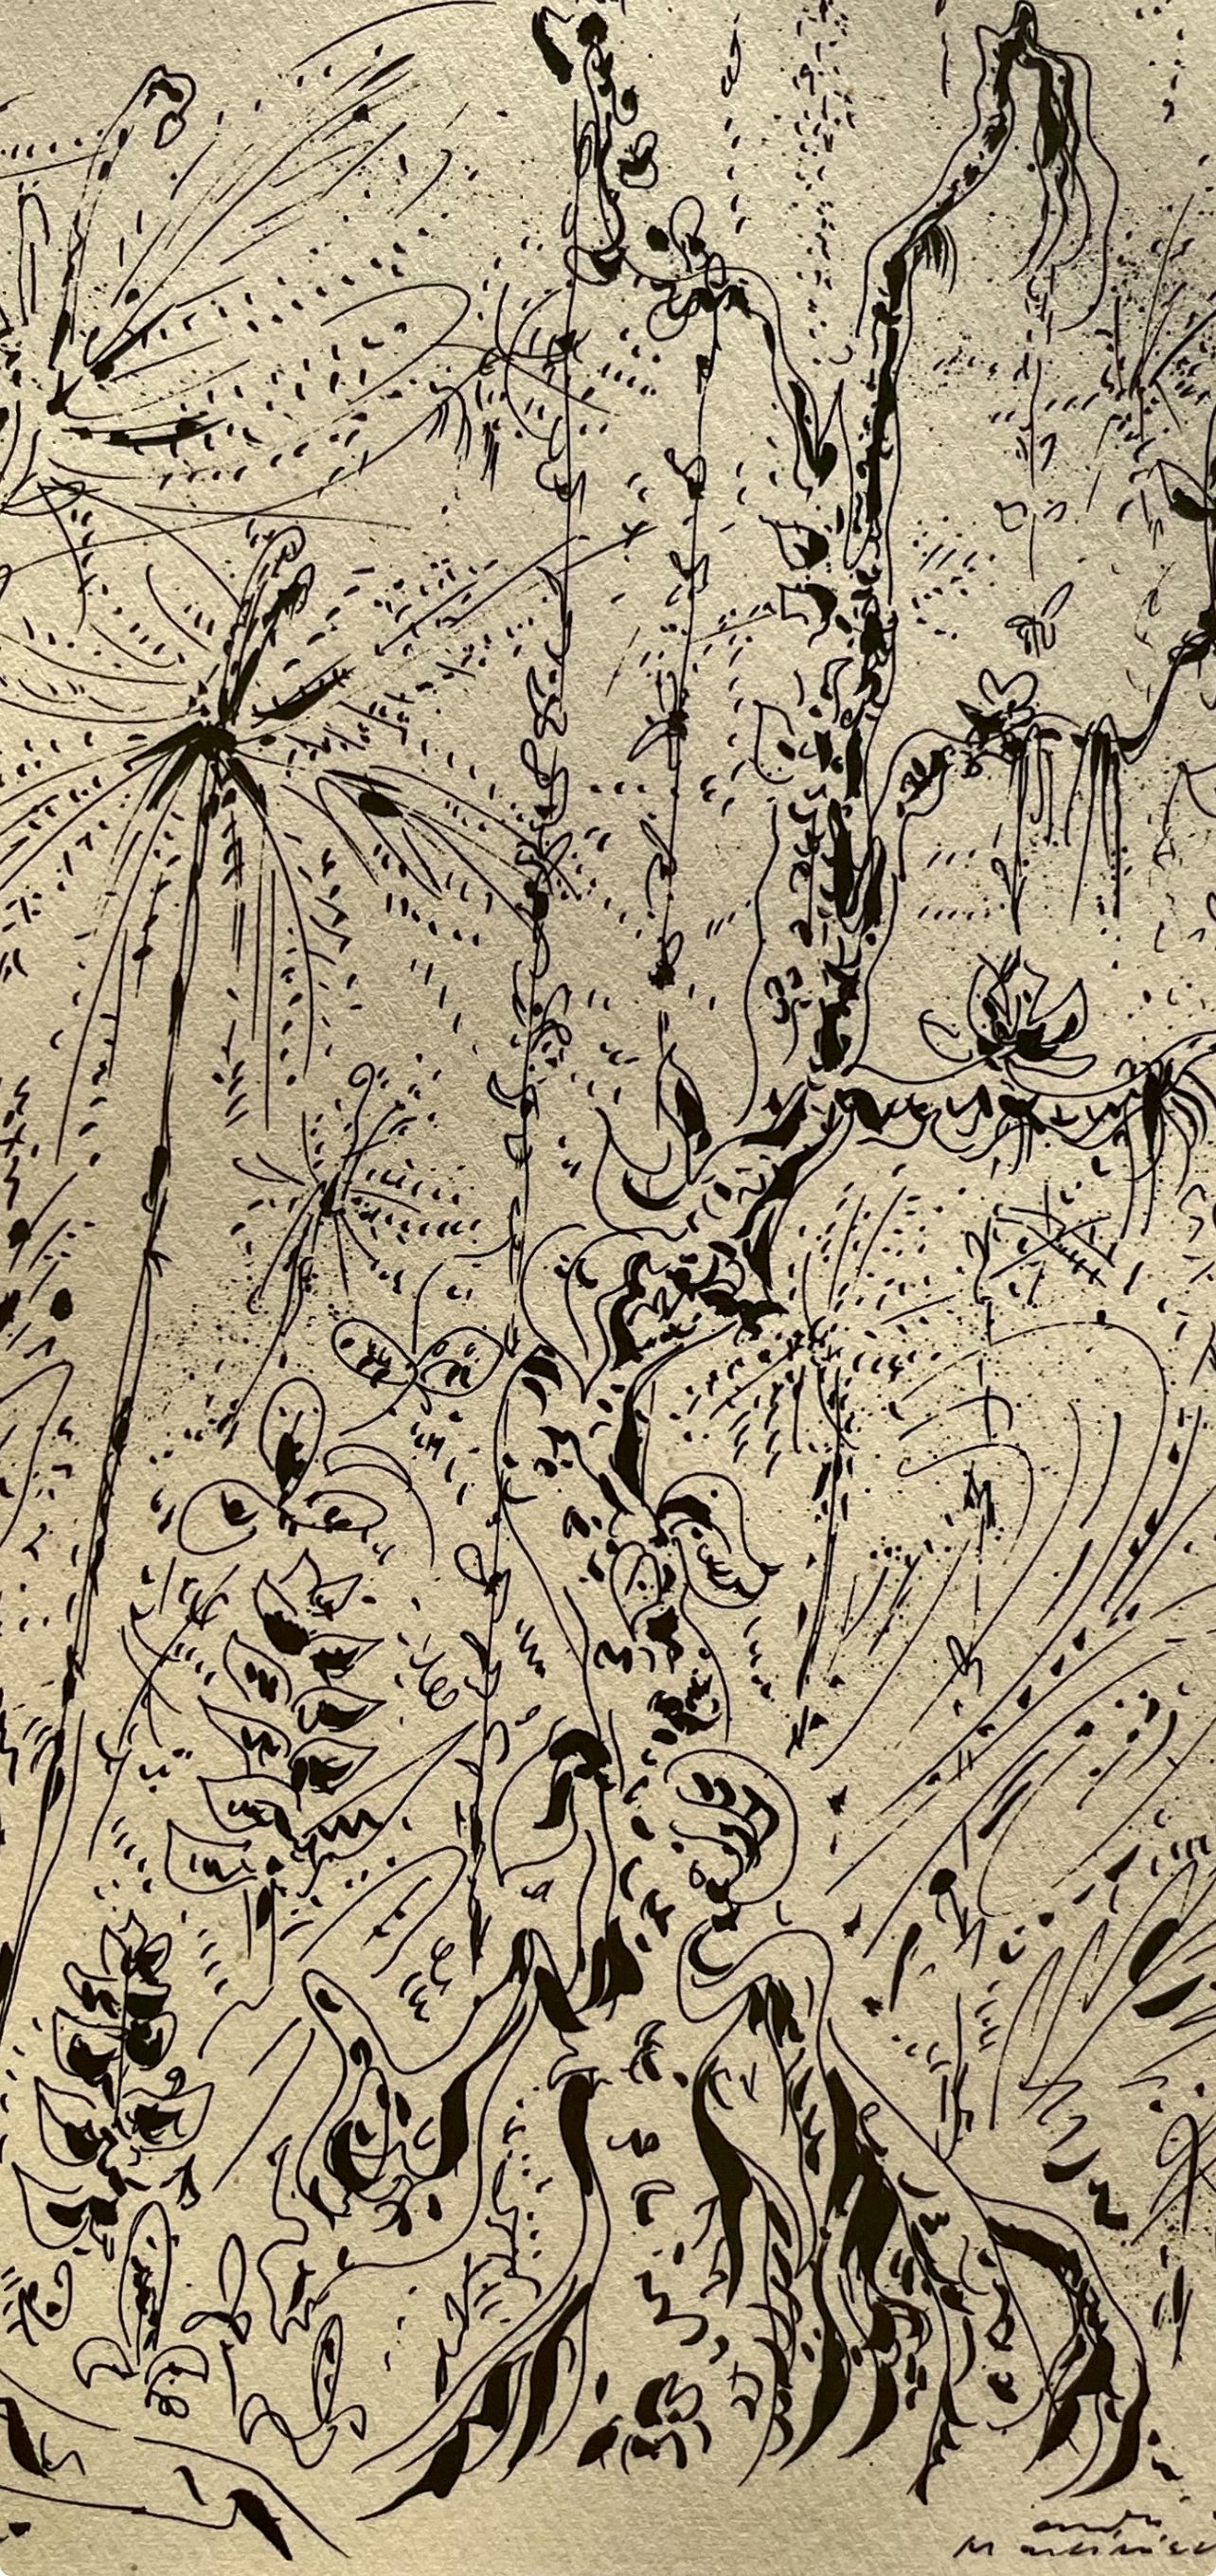 Masson, Forêt martiniquaise, Masson Dessins (after) - Modern Print by André Masson